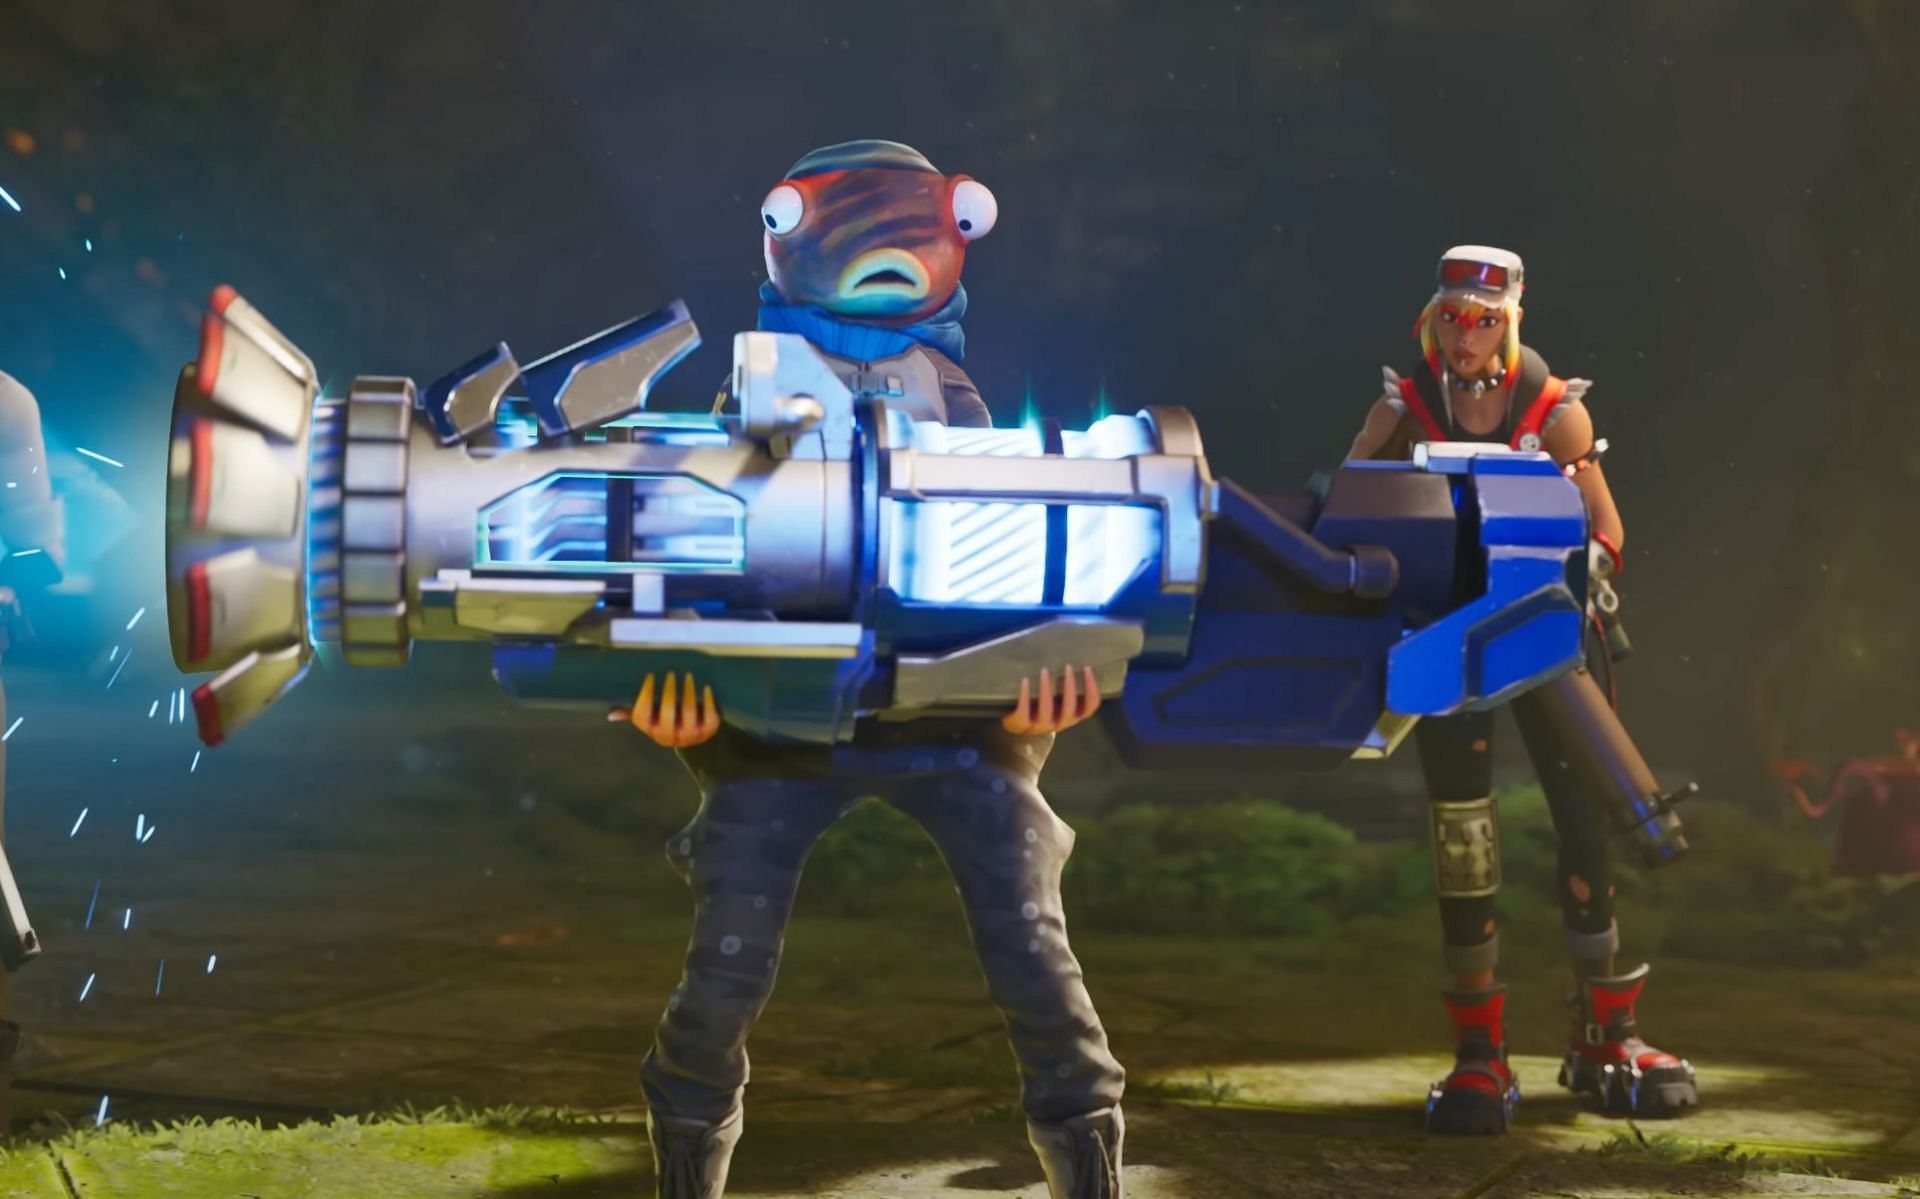 The Cybertron Cannon is very destructive (Image via Epic Games)